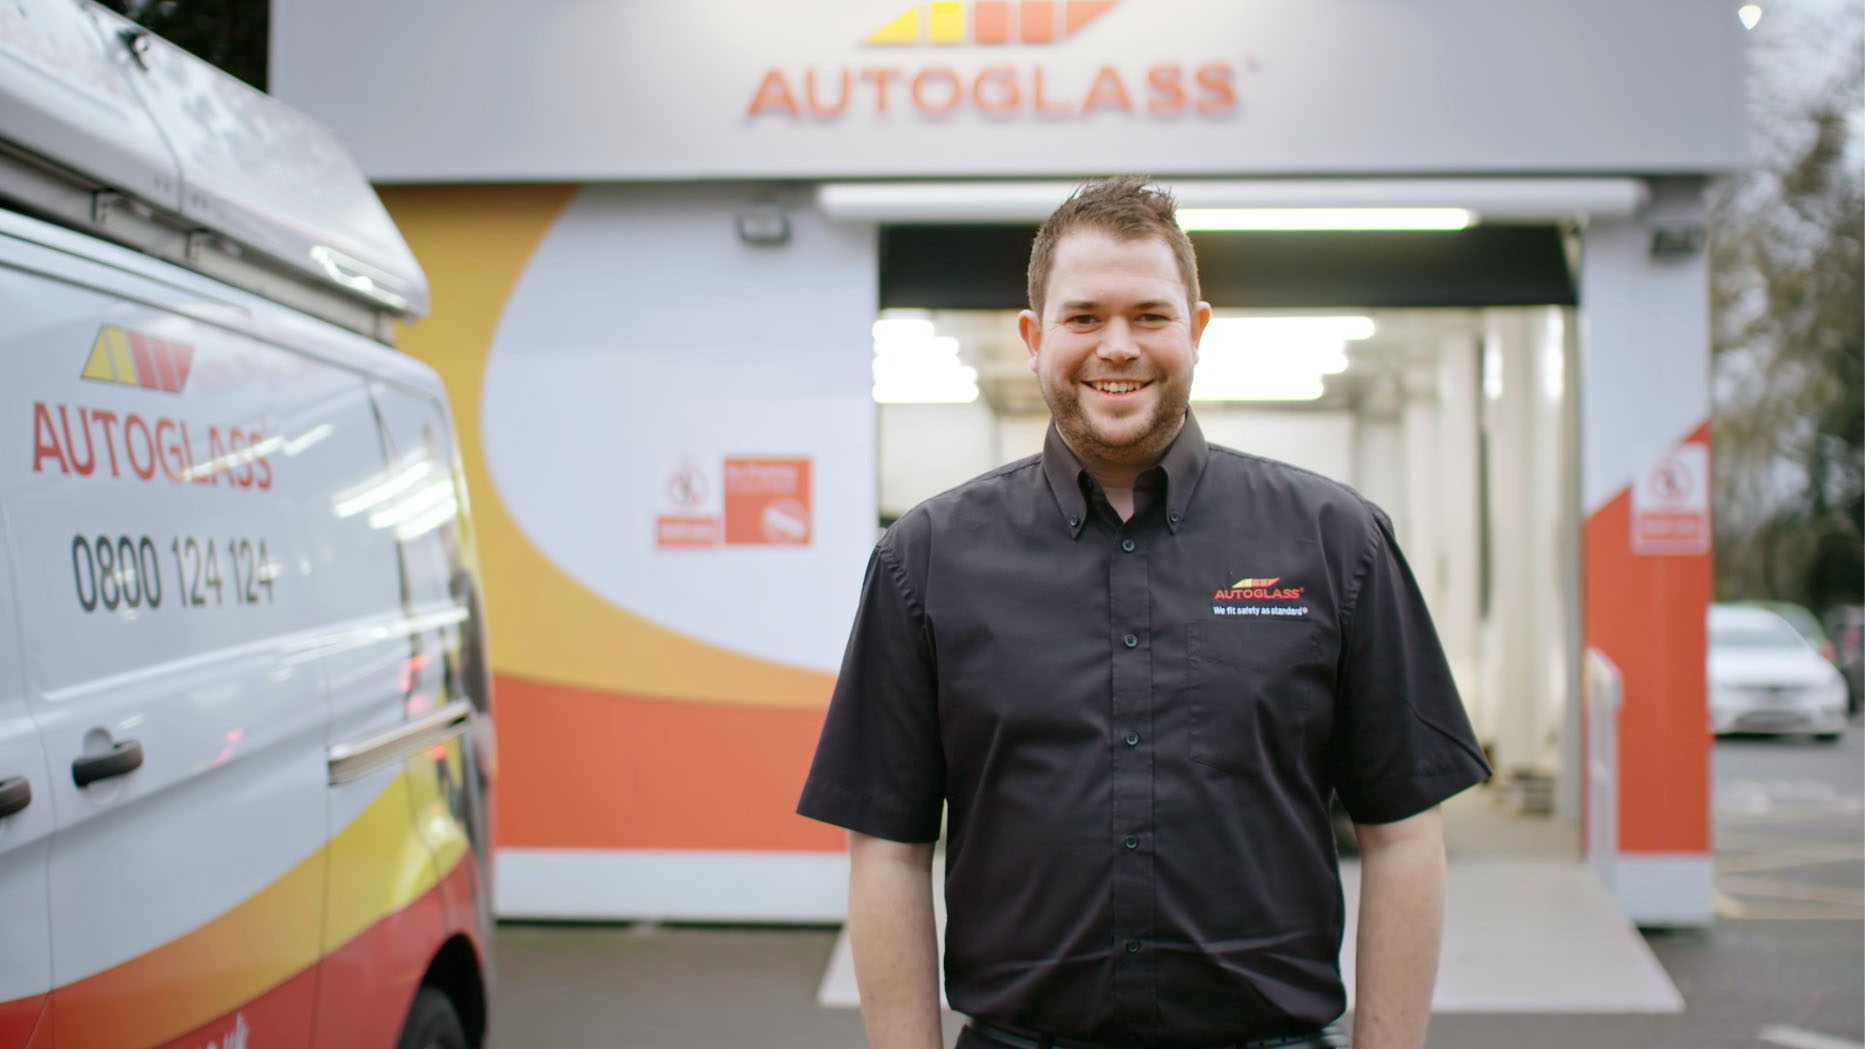 Man in a uniform stands in front of an Autoglass facility smiling